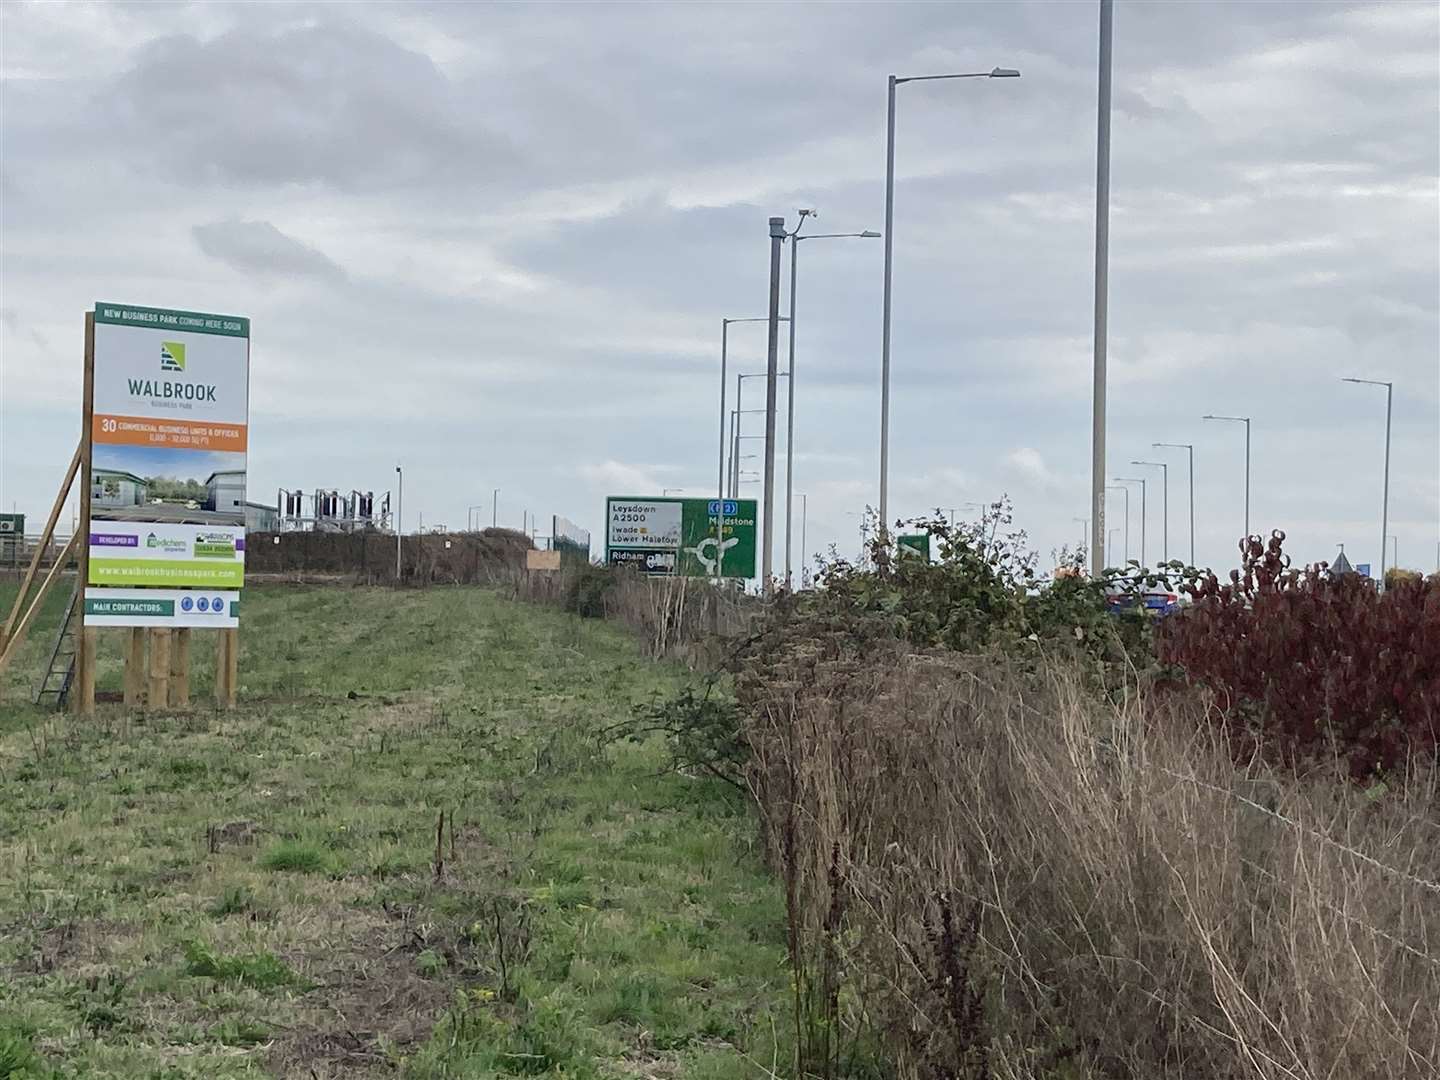 The site of Walbrook Business Park fronting the A249 at Neats Court, Queenborough